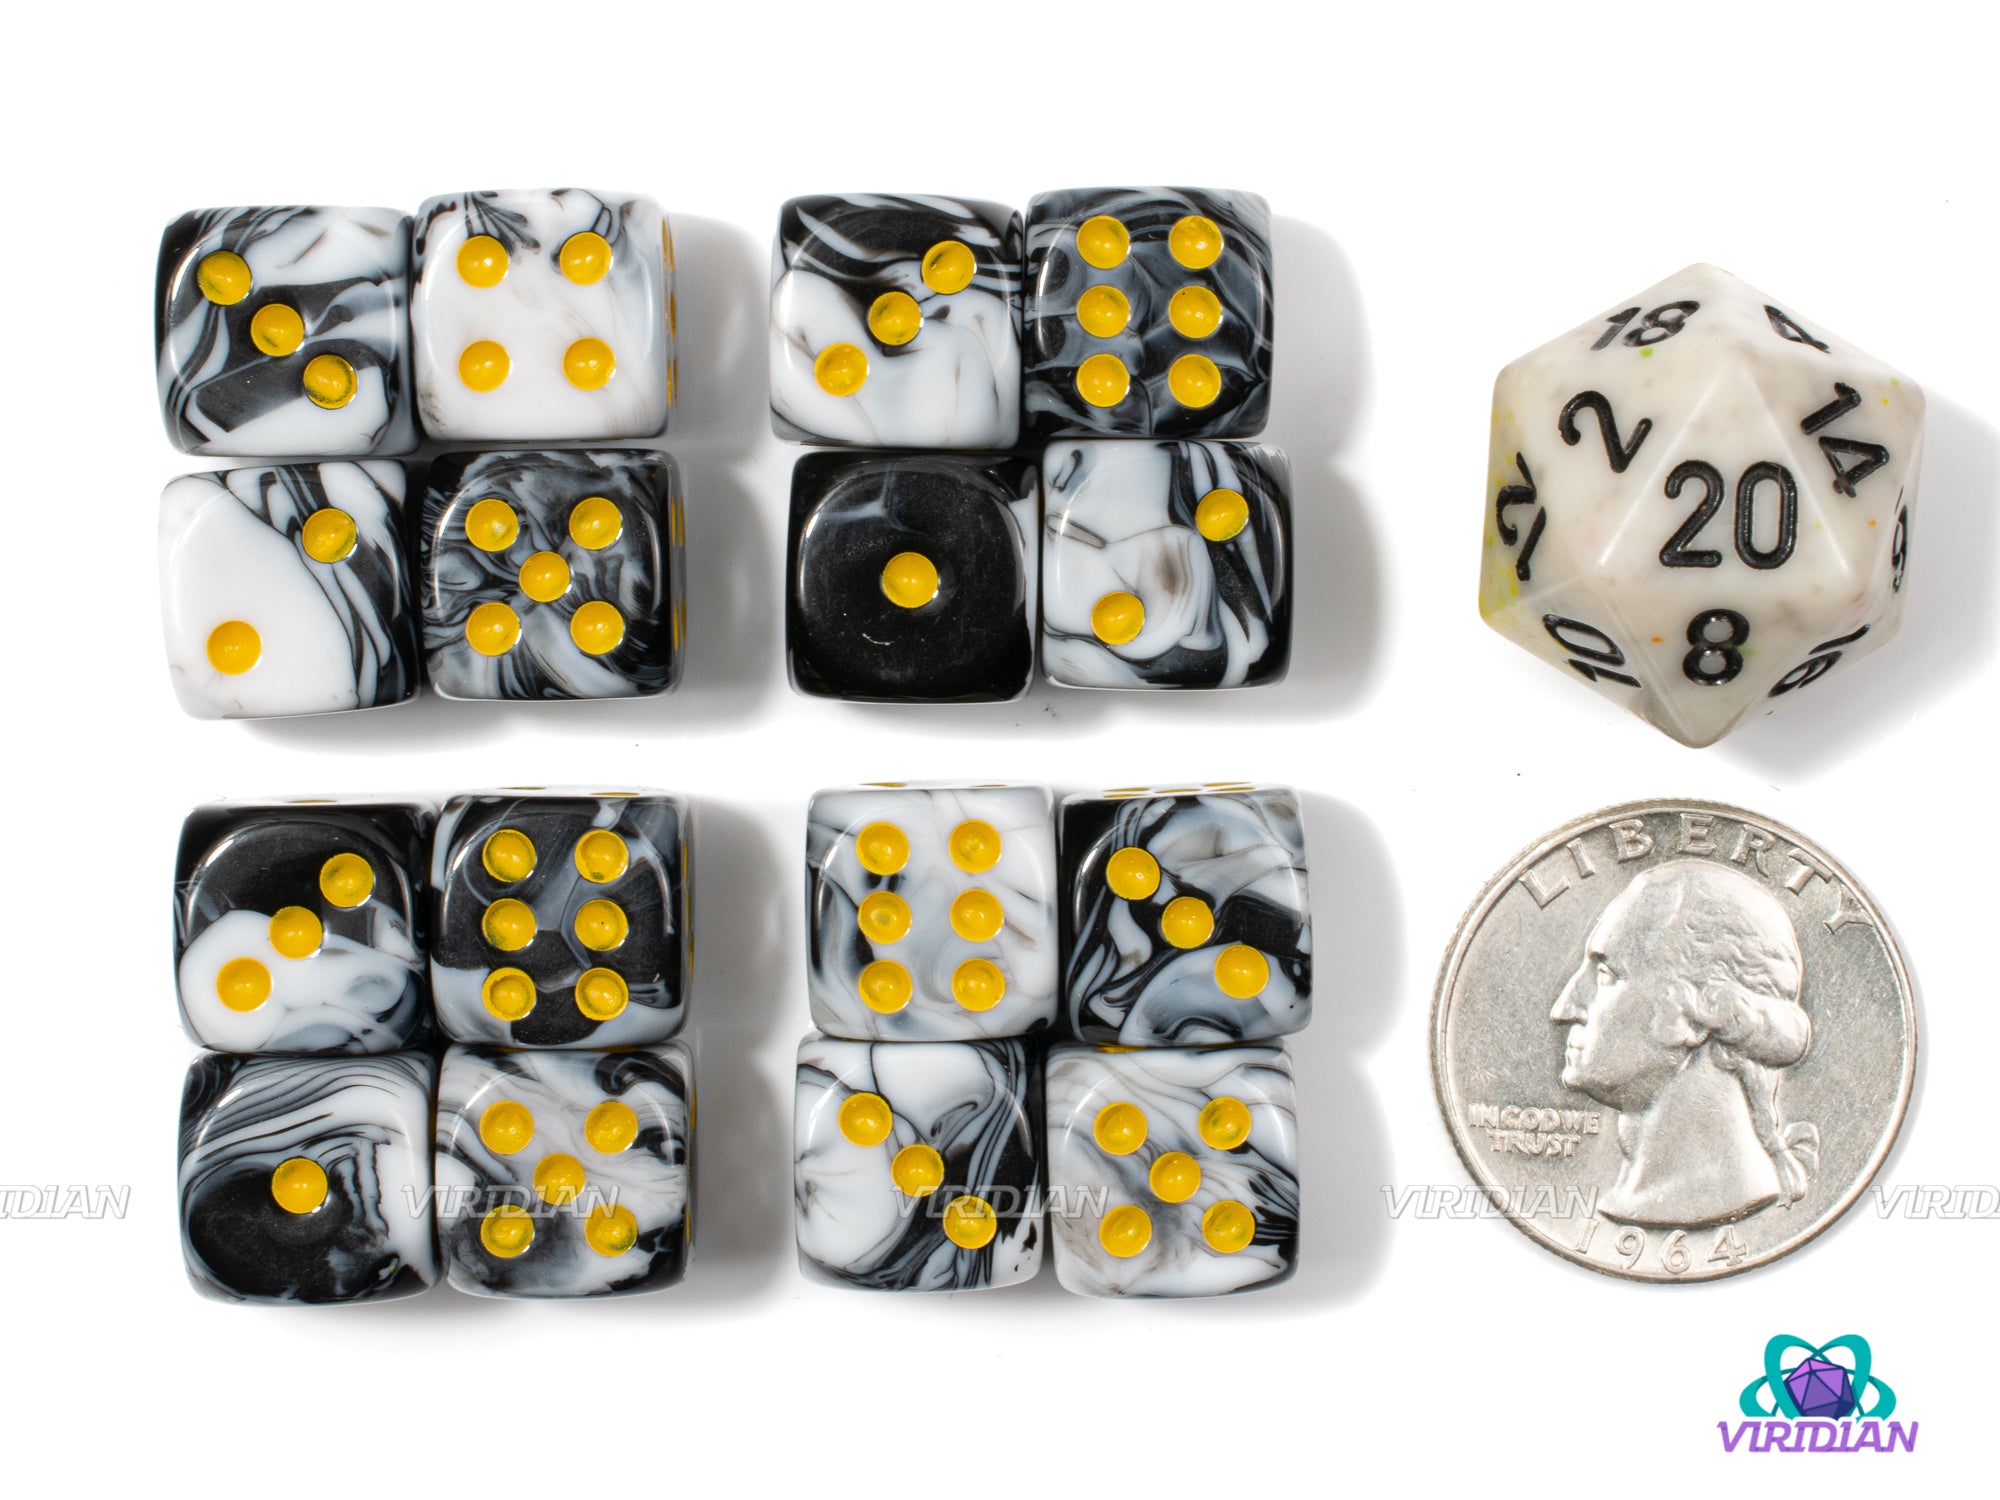 Half Moon (16) 12mm D6s | Black & White Swirled | Set of (16) Pipped D6s | Wargaming